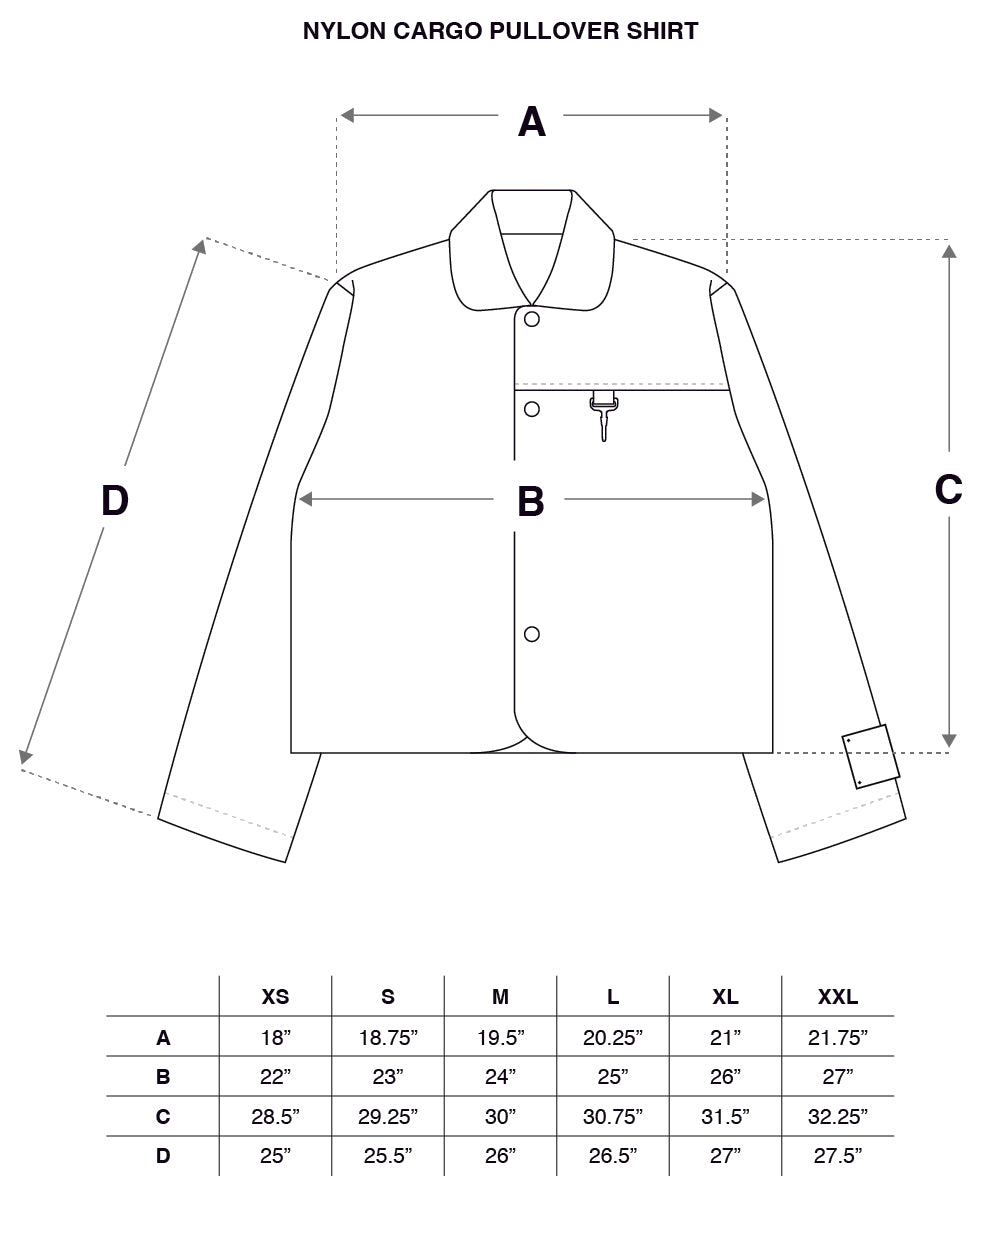 Nylon Cargo Pullover Shirt in Stone Size Guide